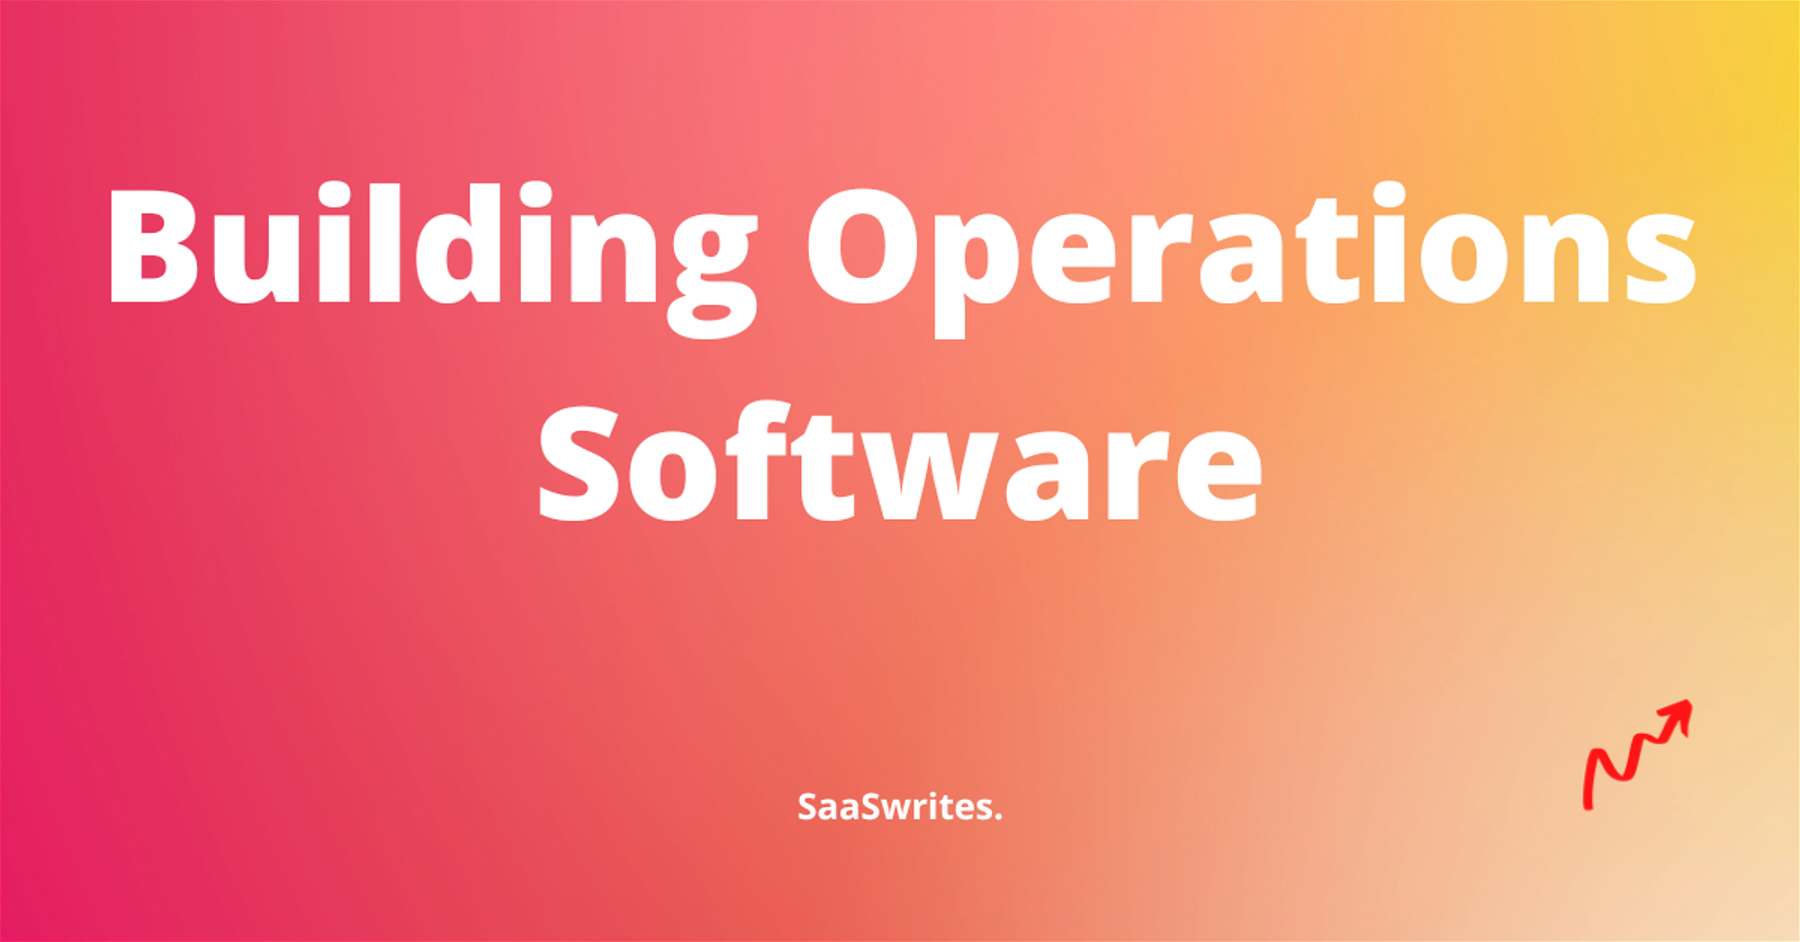 Building Operations Software